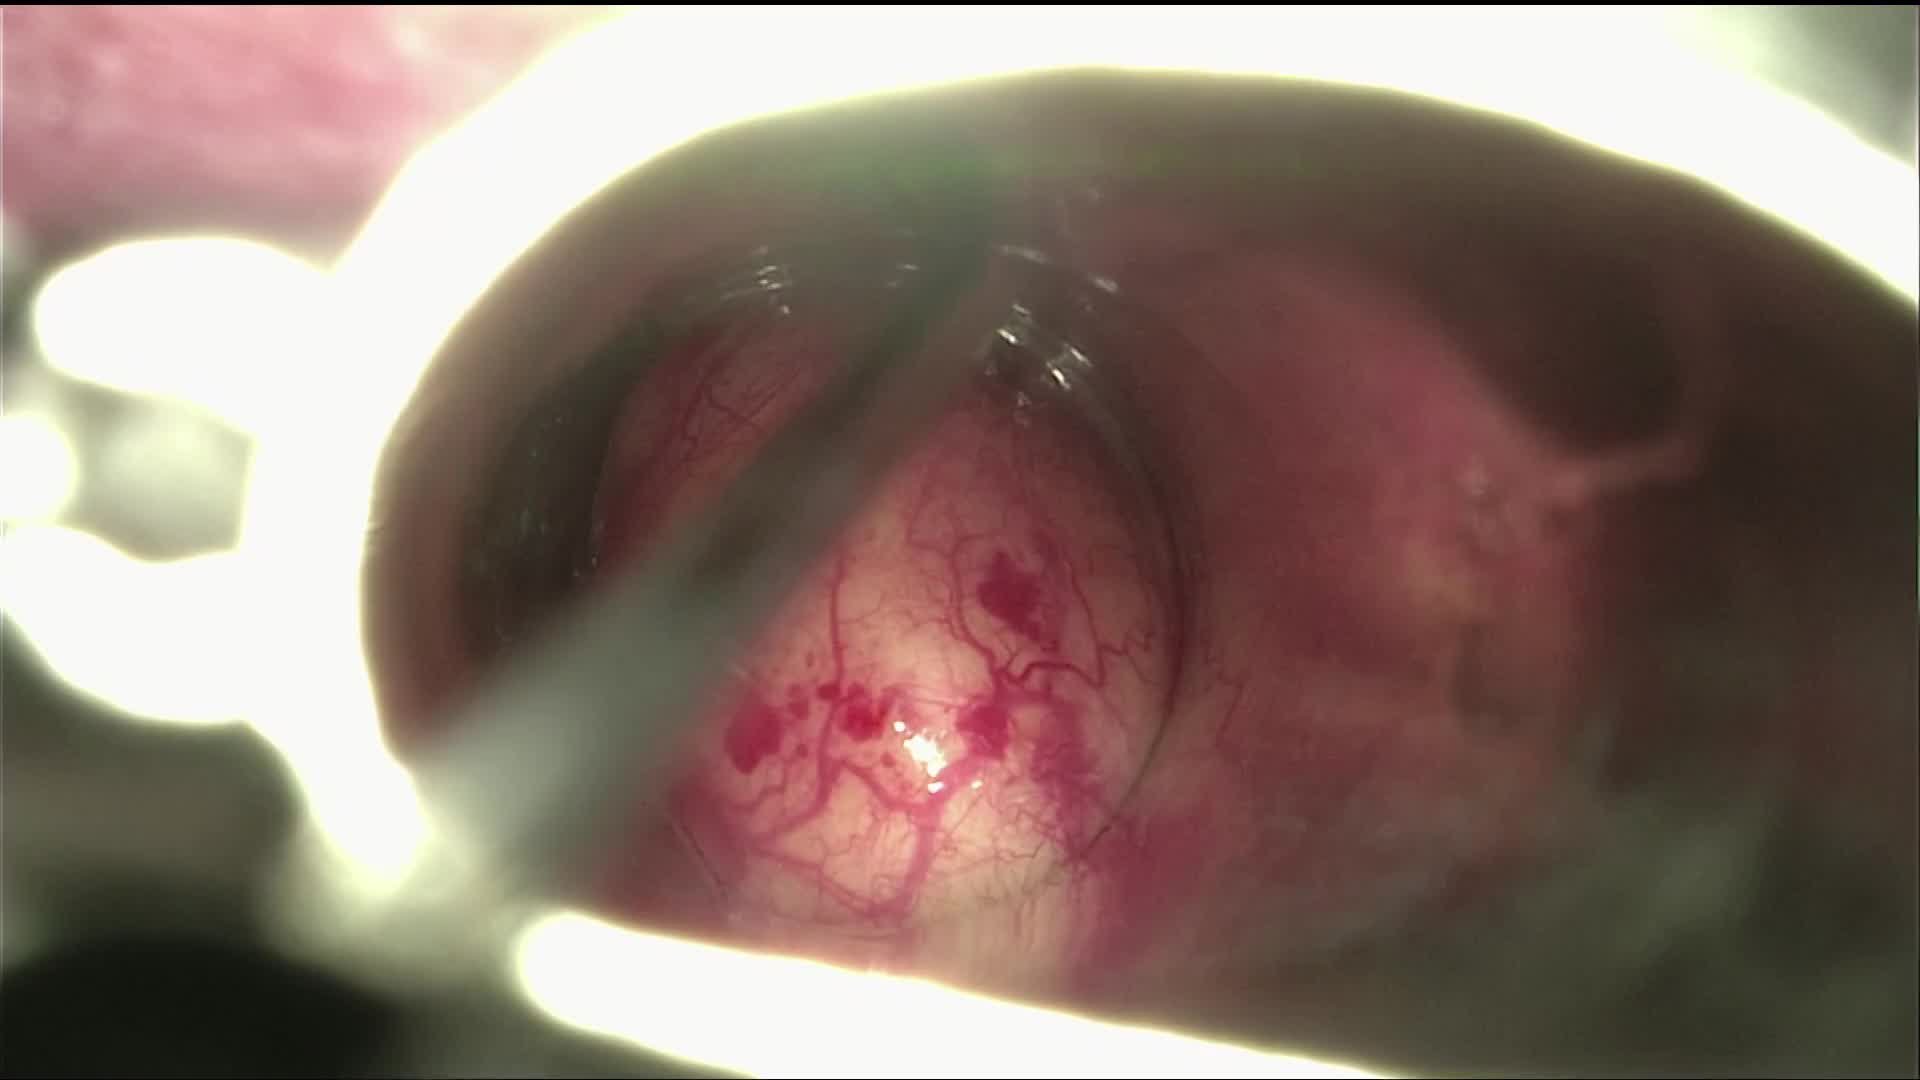 Cyst of the vallecula